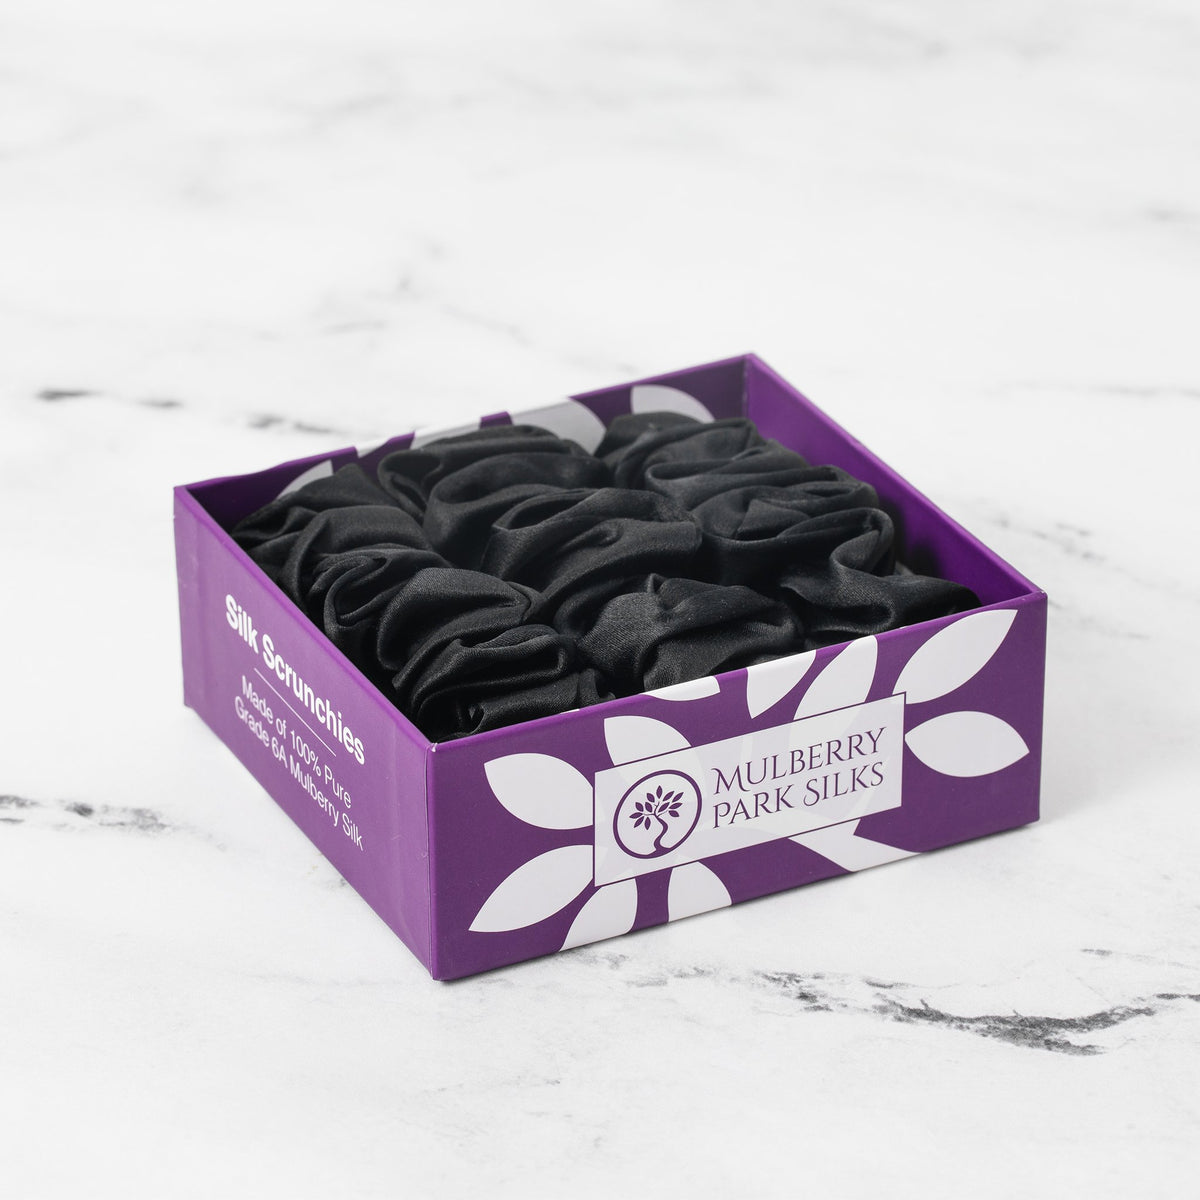  Mulberry Park Silks Silk Scrunchies - Midnight Black - Pure Mulberry Silk Large in Box on Marble